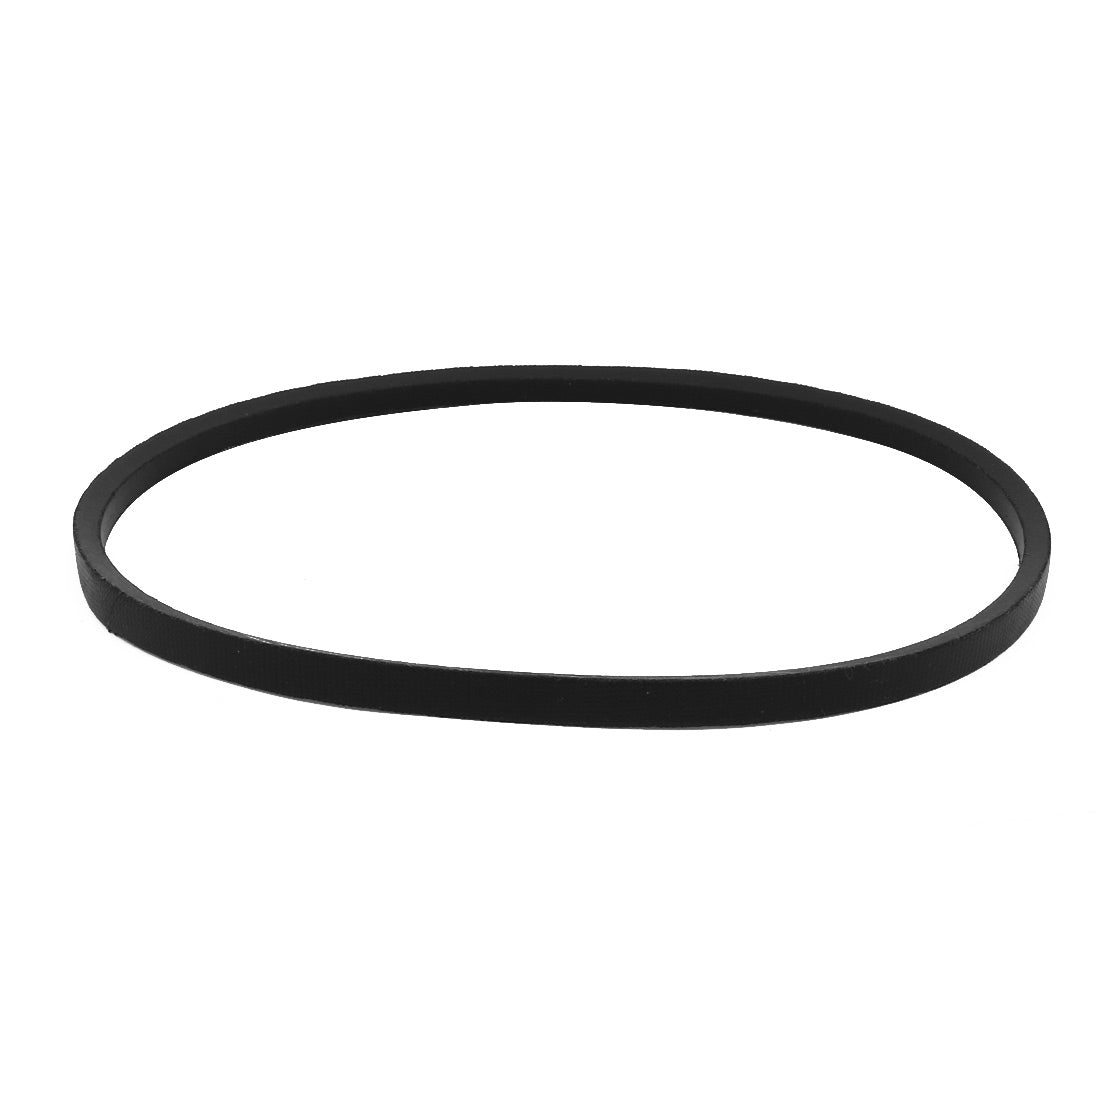 uxcell Uxcell O-550 550mm Inner Girth Transmission Drive Belt Washing Machine Replacement